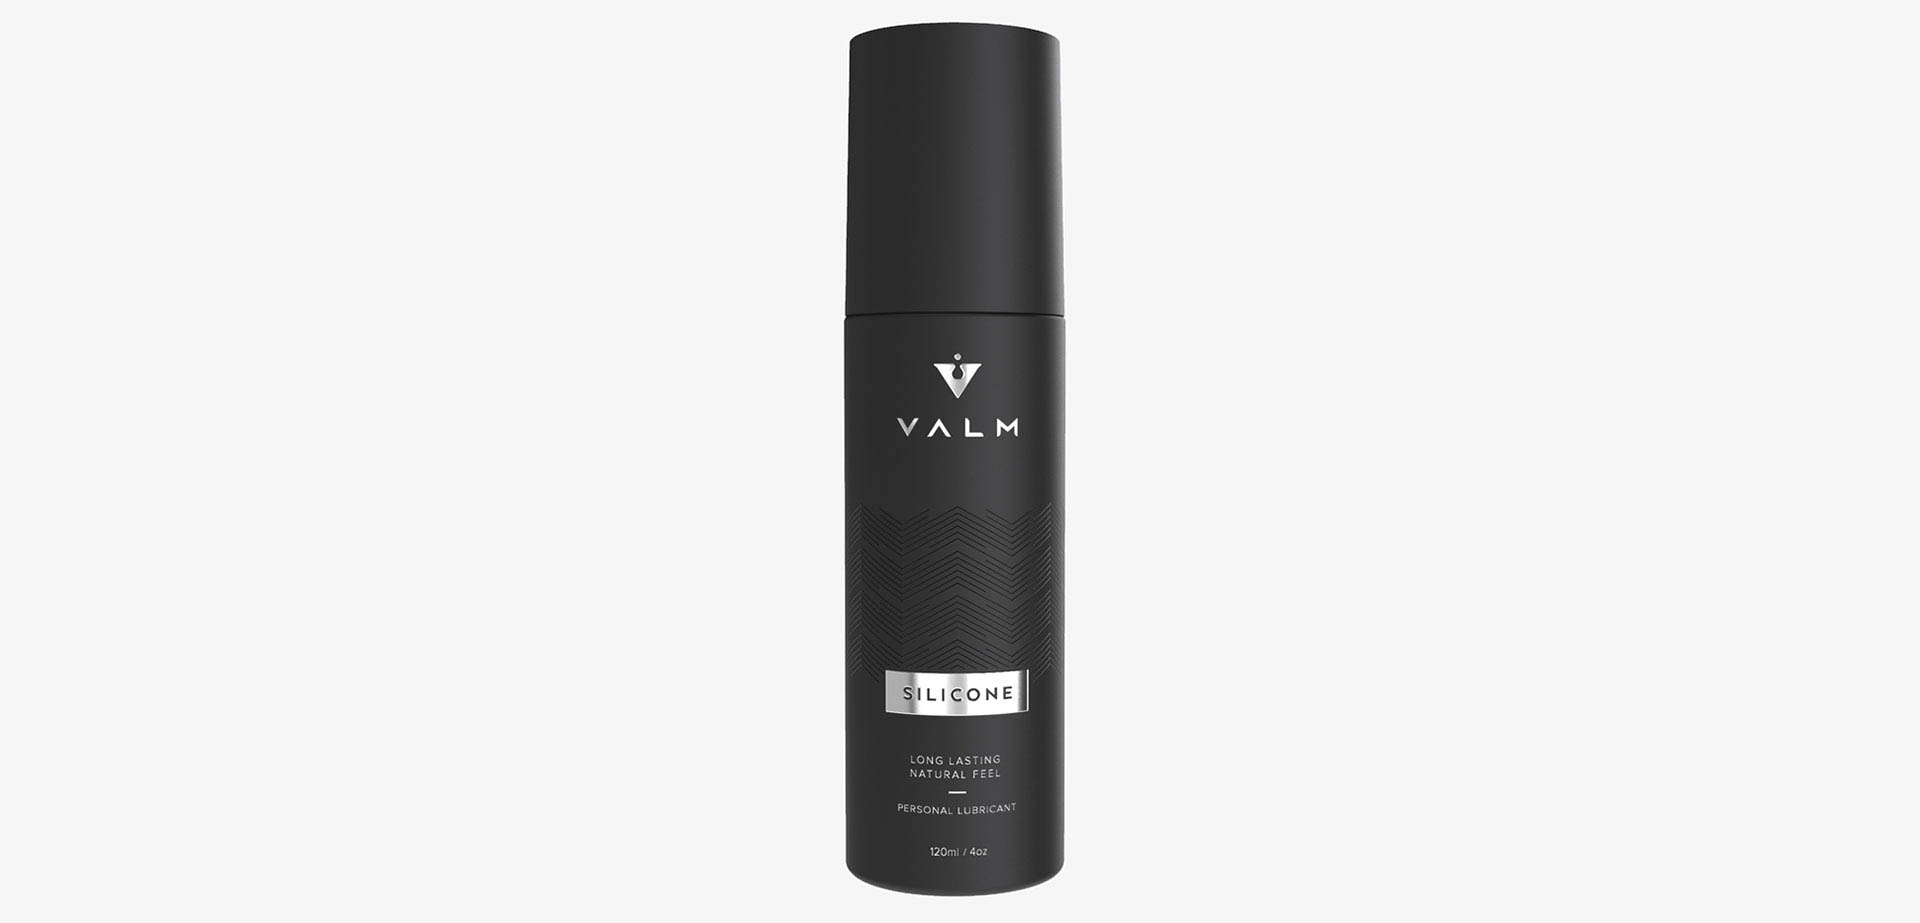 Valm Silicone Based Lube.